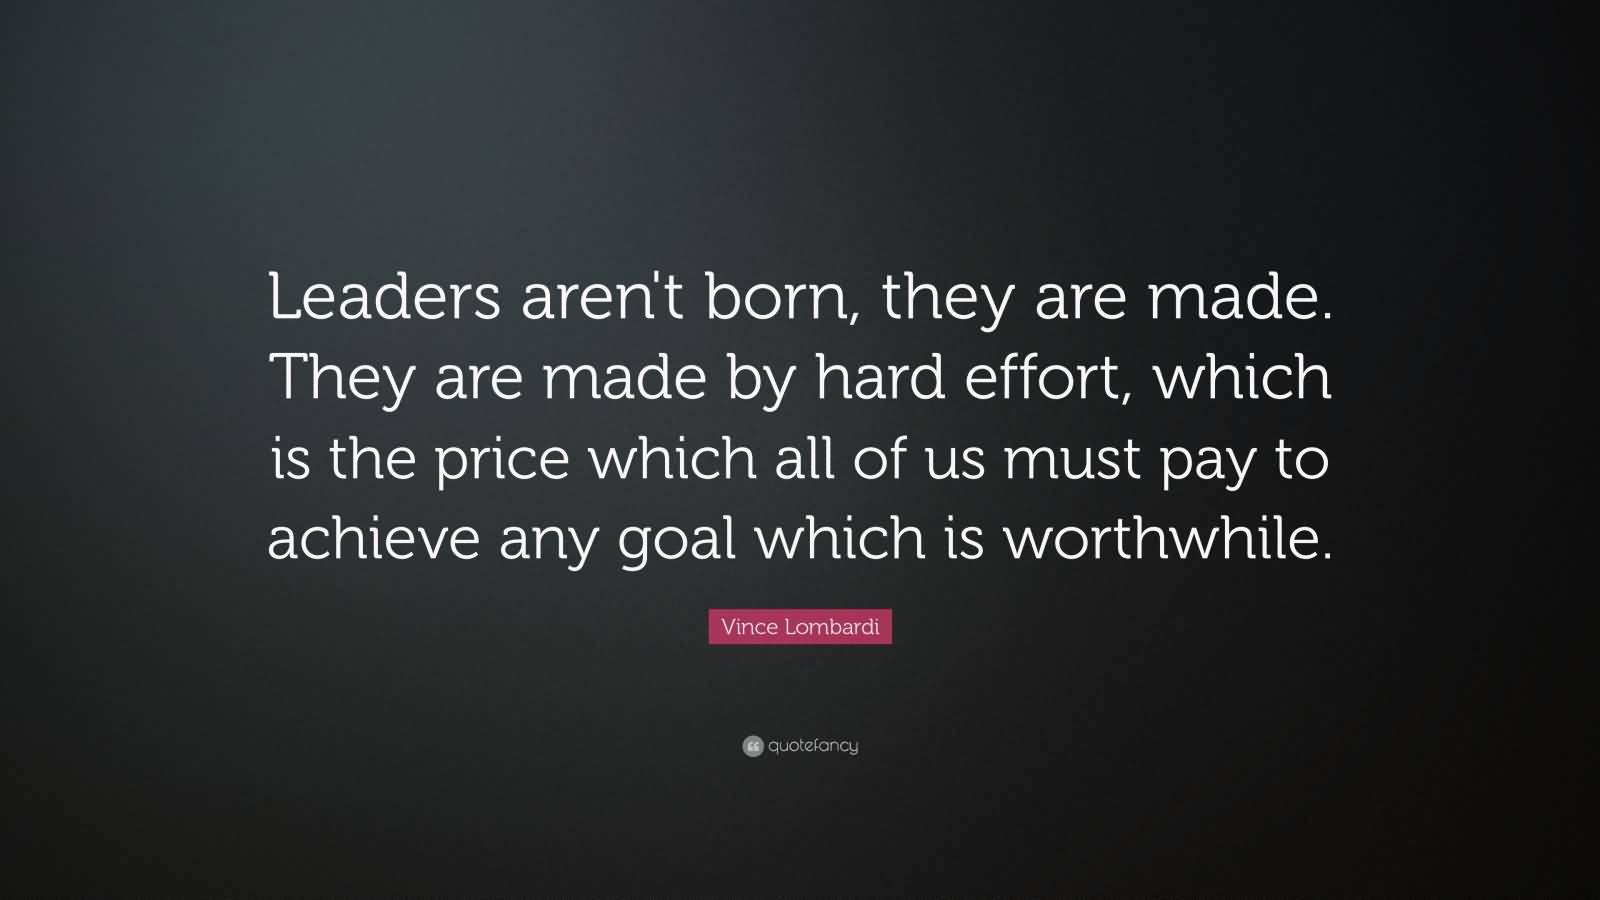 Leaders are made, they are not born. They are made by hard effort, which is the price all of us must pay to achieve any goal that is worthwhile. Vince Lombardi